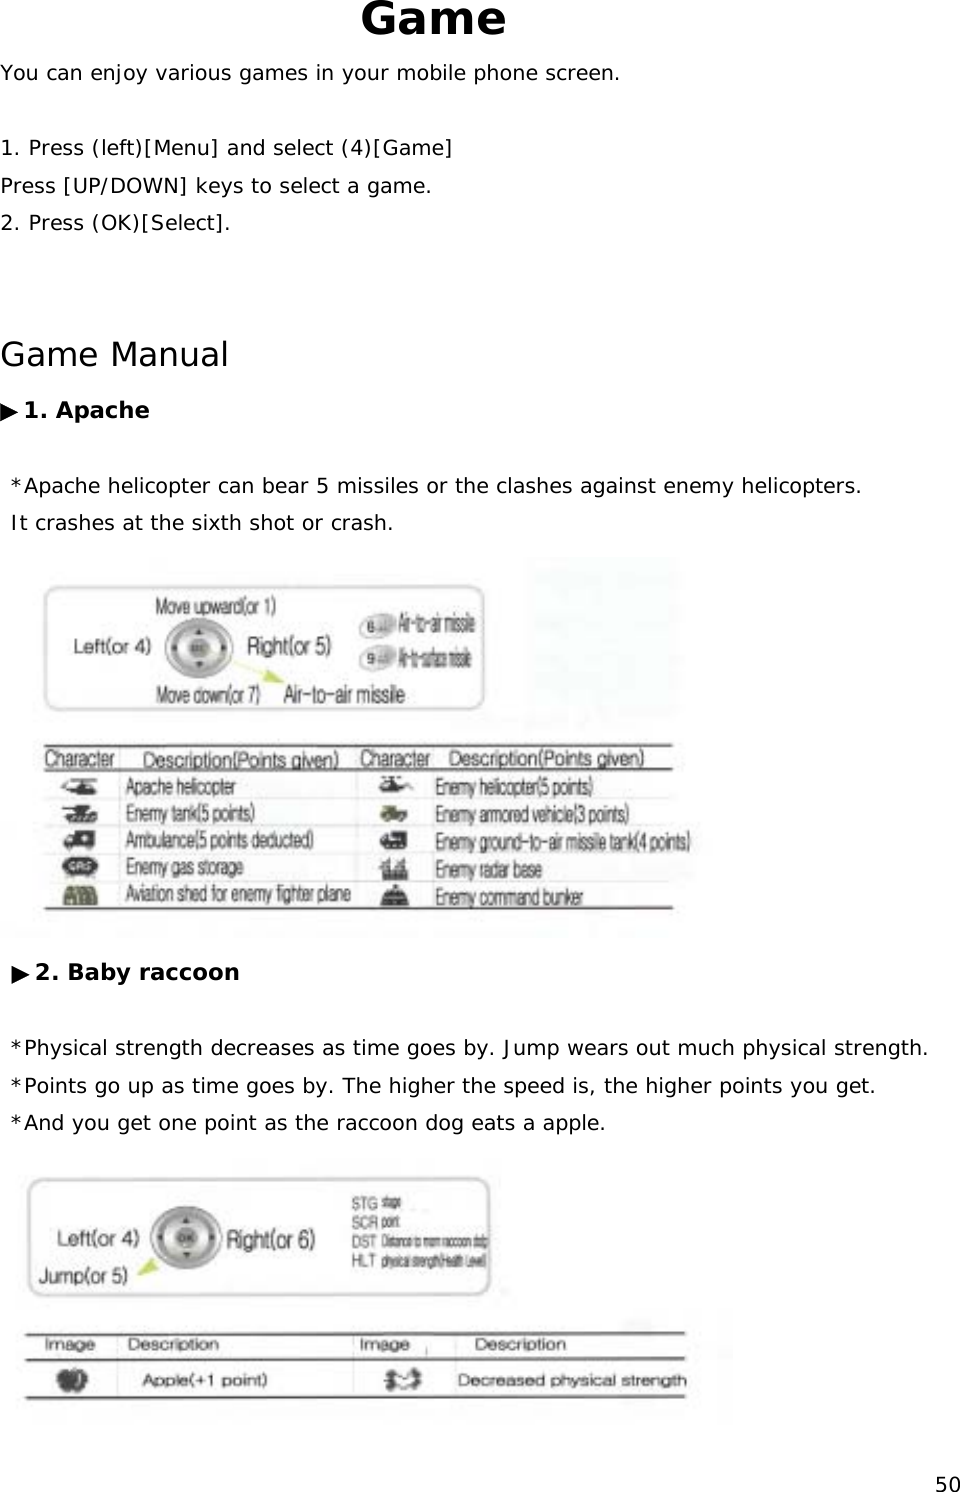 Game You can enjoy various games in your mobile phone screen.  1. Press (left)[Menu] and select (4)[Game] Press [UP/DOWN] keys to select a game. 2. Press (OK)[Select].  Game Manual ▶1. Apache   *Apache helicopter can bear 5 missiles or the clashes against enemy helicopters.   It crashes at the sixth shot or crash.   ▶2. Baby raccoon   *Physical strength decreases as time goes by. Jump wears out much physical strength.  *Points go up as time goes by. The higher the speed is, the higher points you get.  *And you get one point as the raccoon dog eats a apple.   50